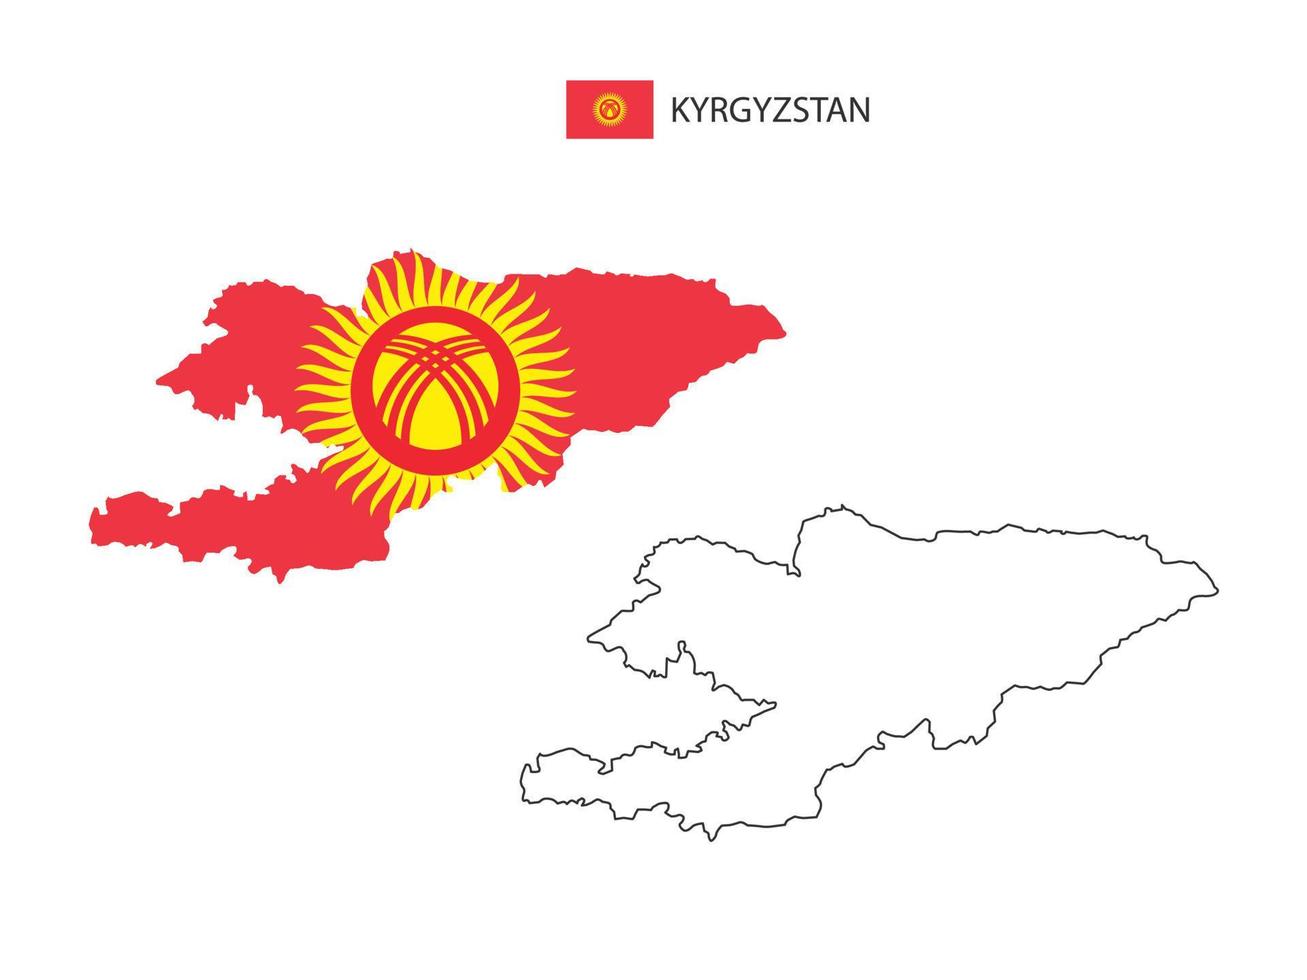 Kyrgyzstan map city vector divided by outline simplicity style. Have 2 versions, black thin line version and color of country flag version. Both map were on the white background.